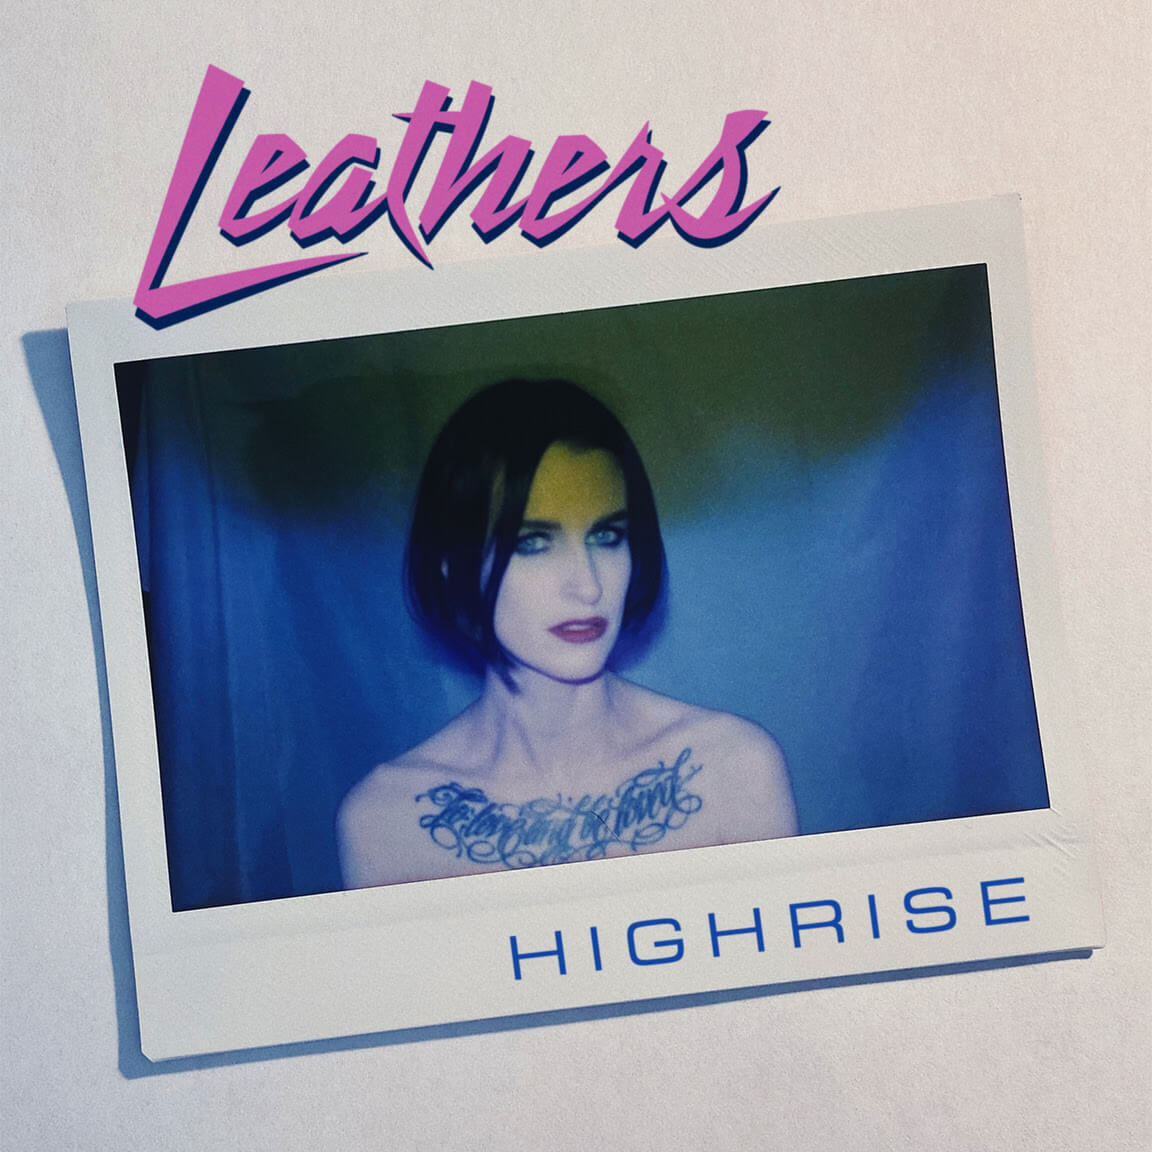 "Highrise" by Leathers is Northern Transmissions Song of the Day